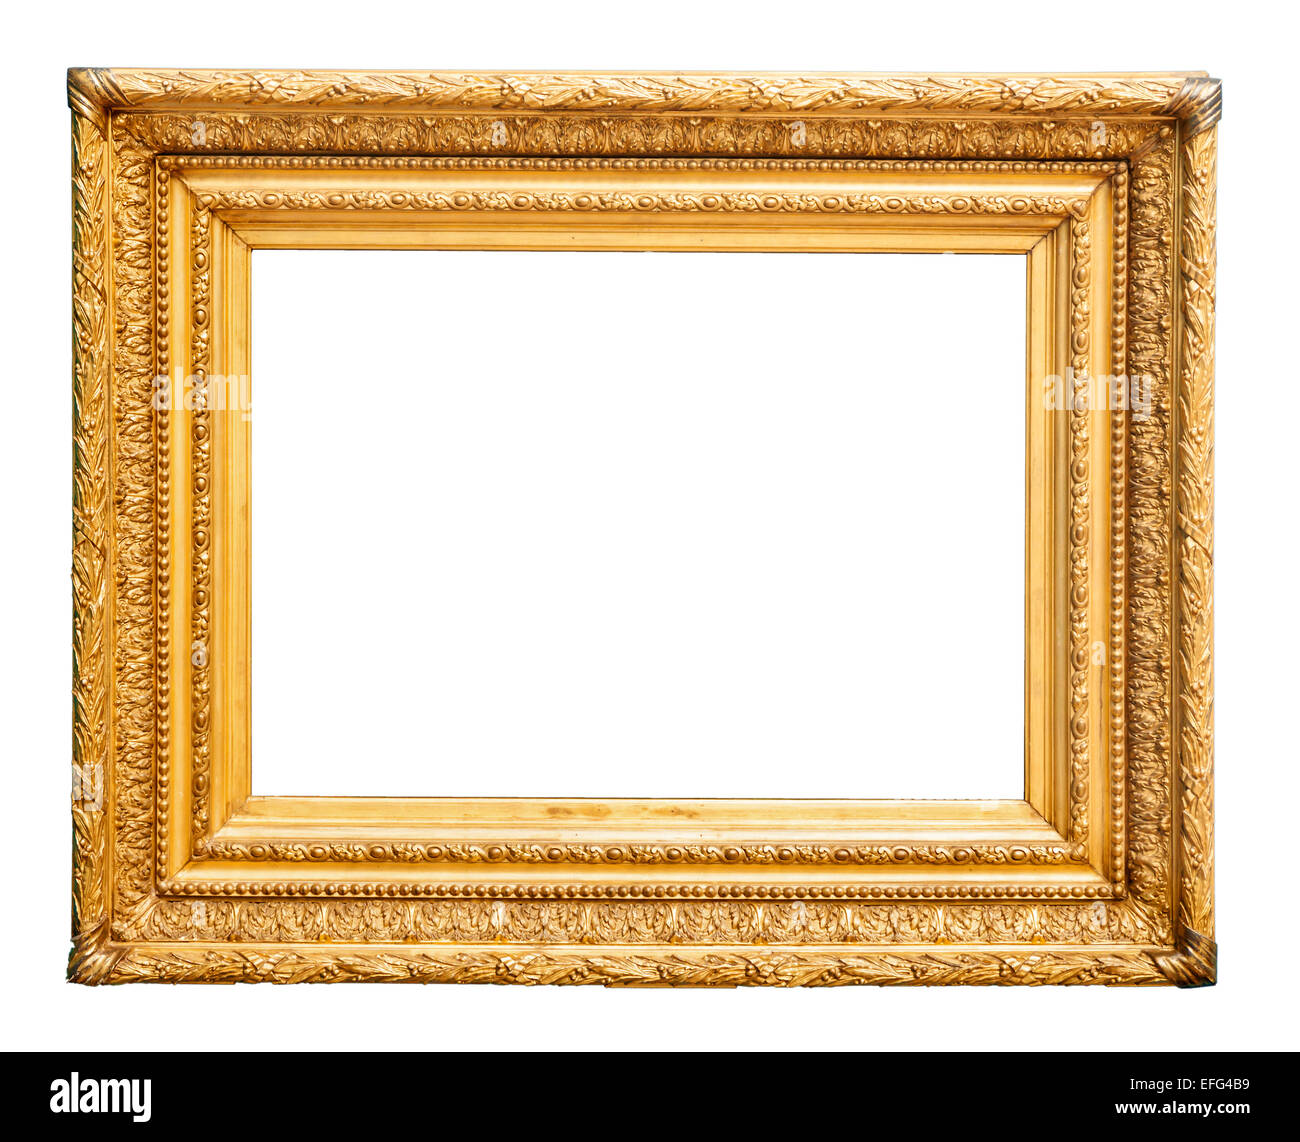 Magnificent old, golden, wooden picture frame Stock Photo